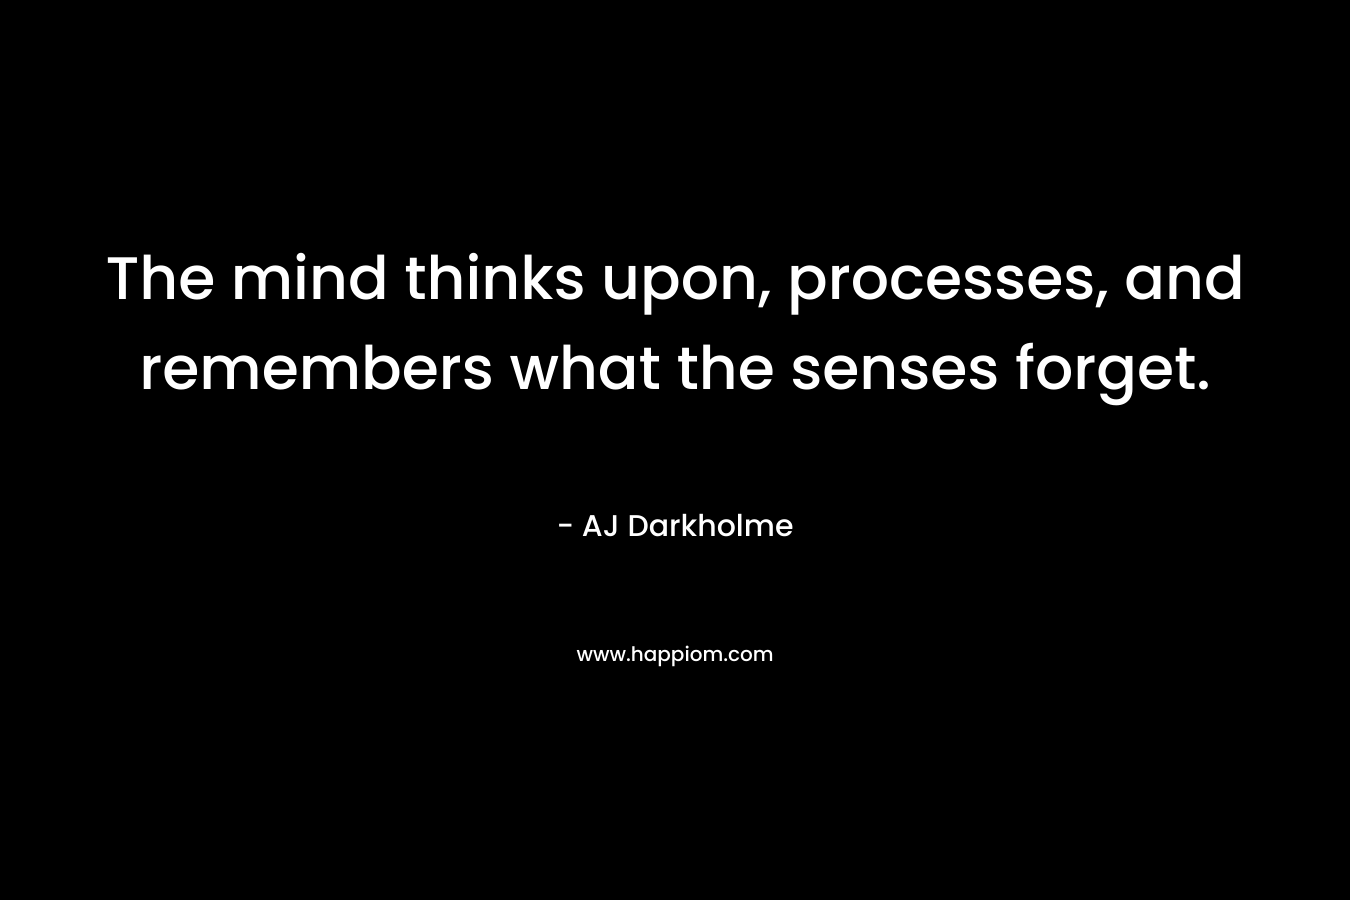 The mind thinks upon, processes, and remembers what the senses forget.